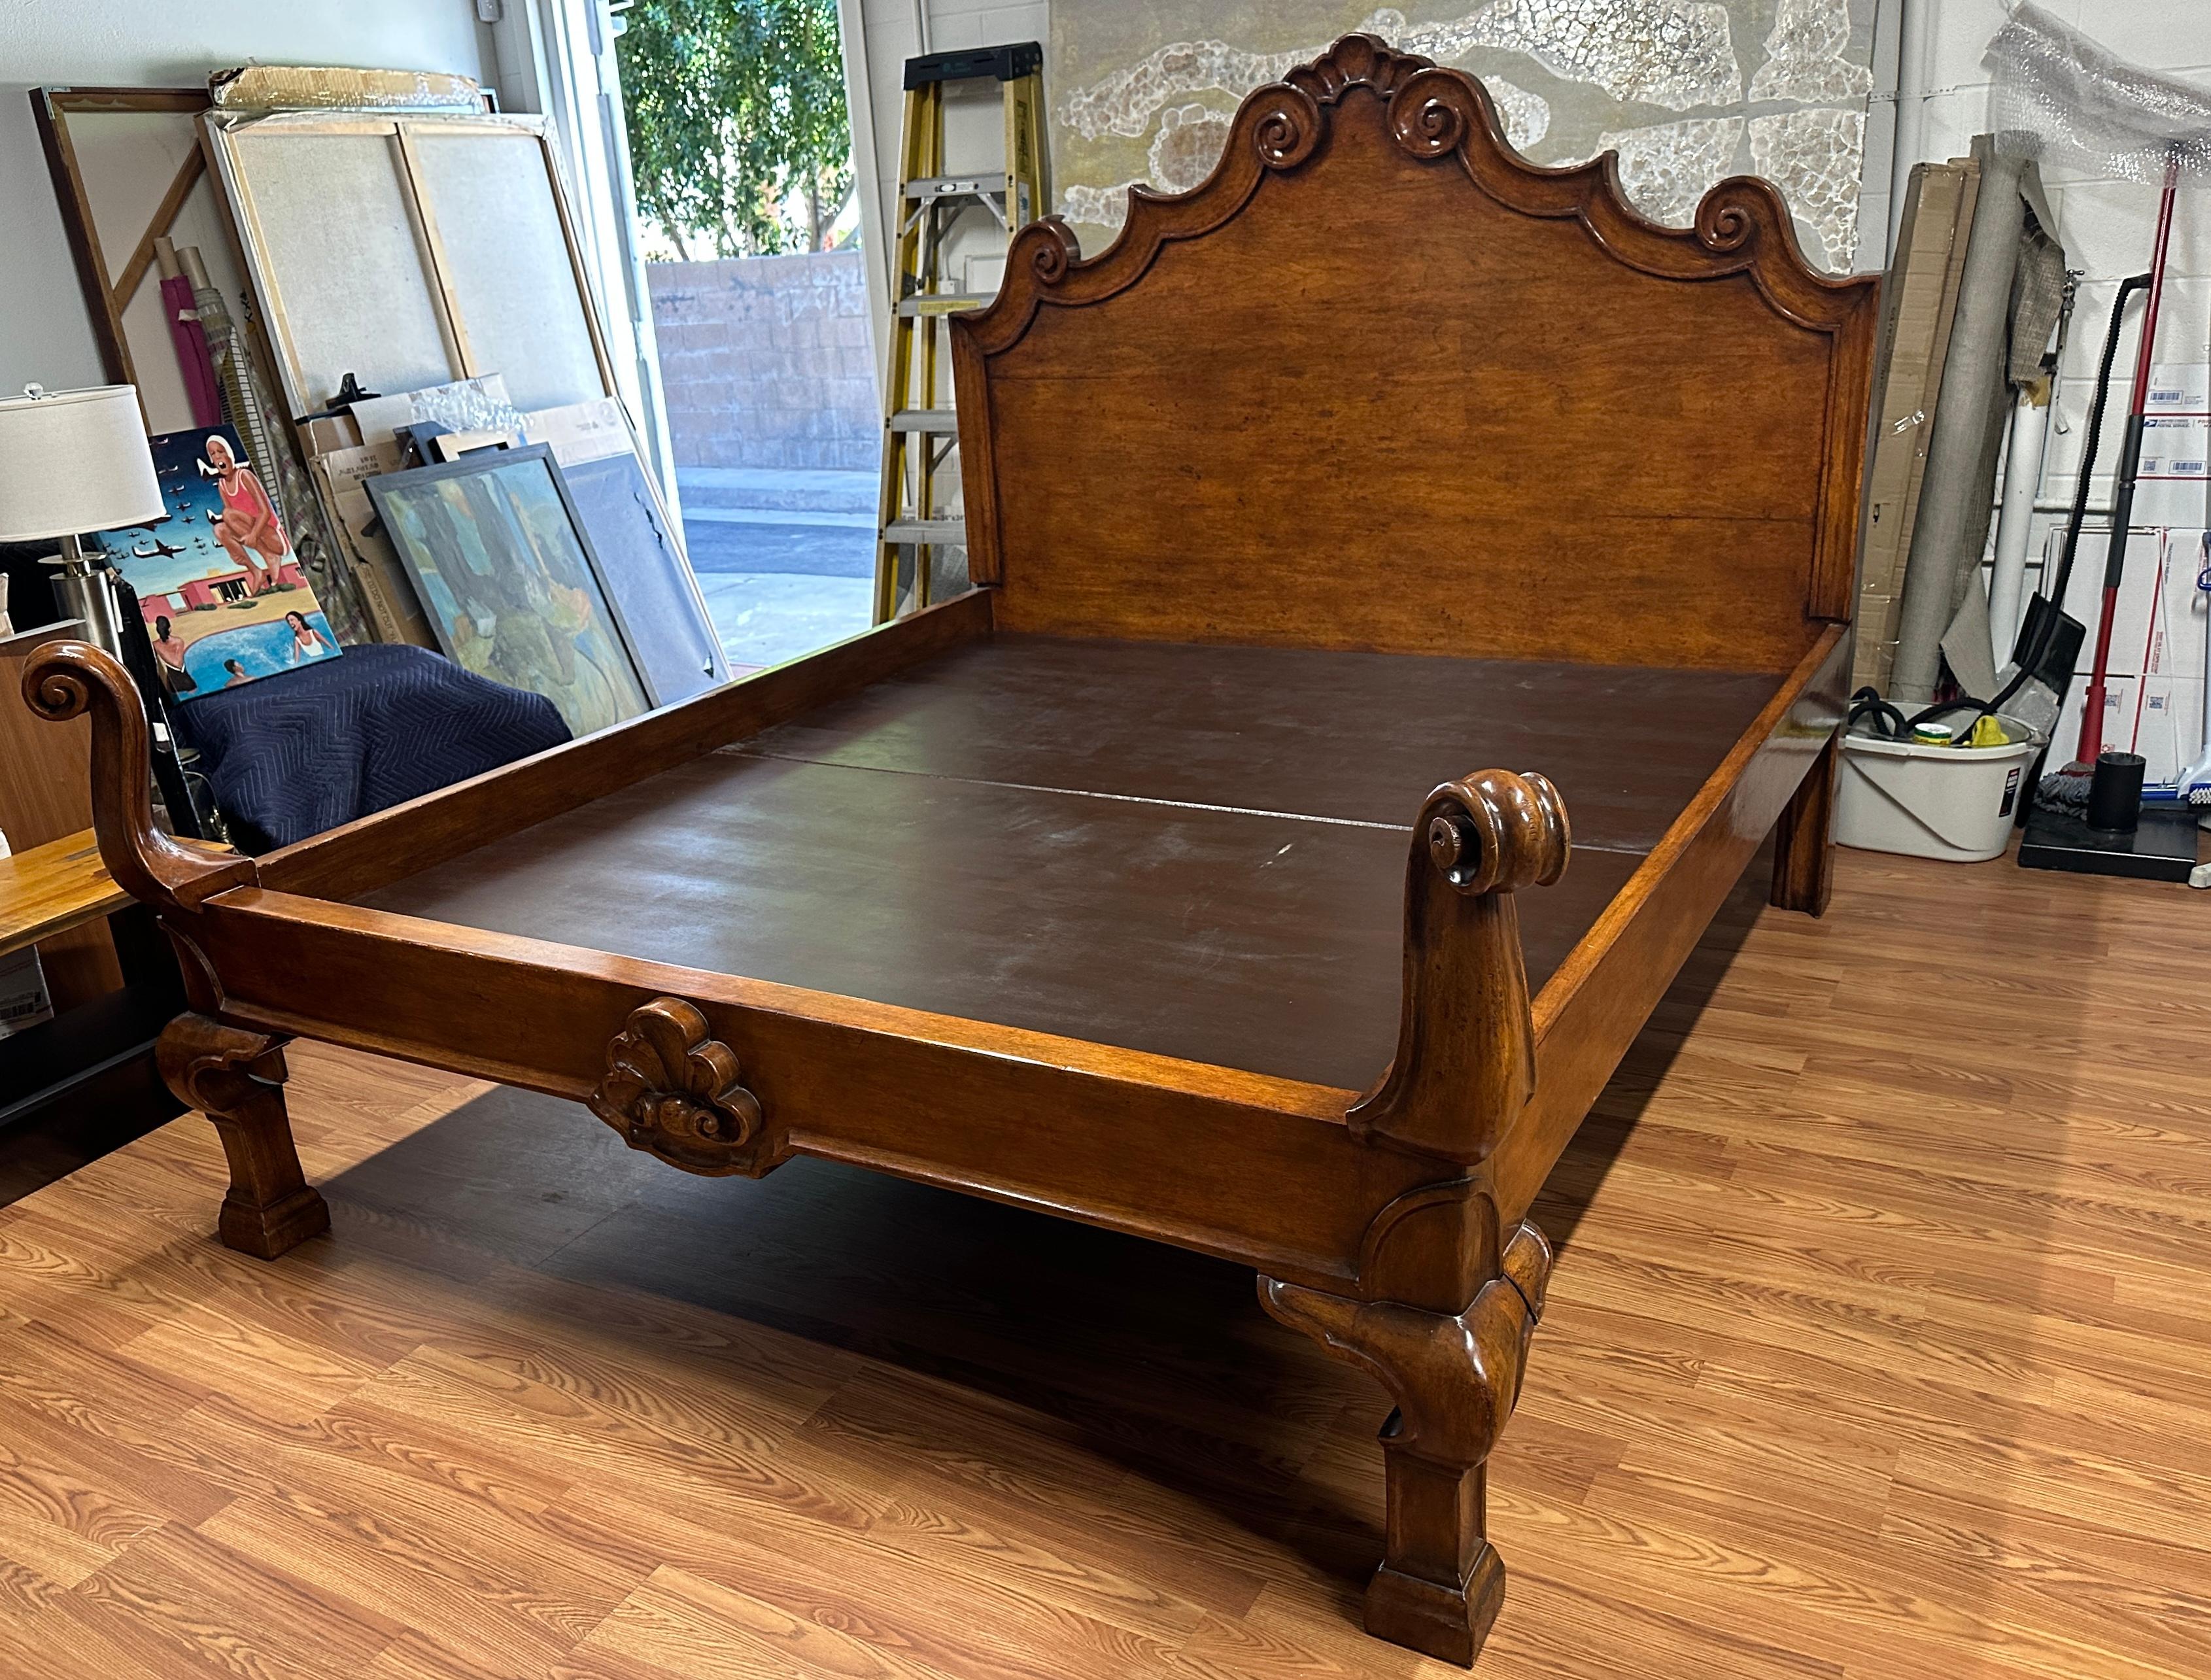 A beautiful bed frame designed by Michael Taylor. It his Italian bed and is in a California King size. The bed is beautifully carved and features his label on the back of the headboard. The interior mesurements are 74x86 inches. Out of a wonderful